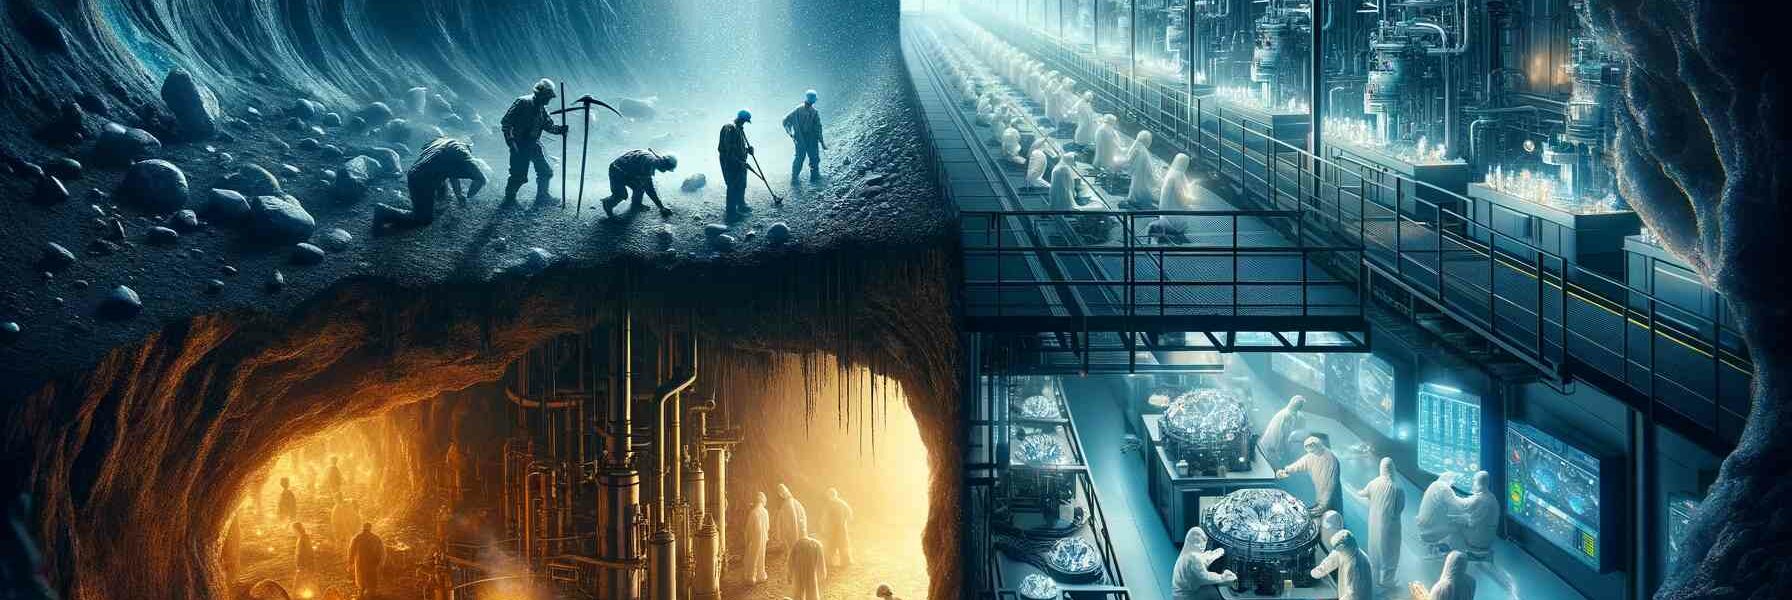 A Split Scene Showing A Dark Underground Mine With Miners Extracting Natural Diamonds On The Left, And A Bright, Modern Laboratory Crafting Lab-Grown Diamonds On The Right, Emphasizing The Theme Of 'Natural Gems Under Pressure' From Both Technological Innovation And Market Dynamics.